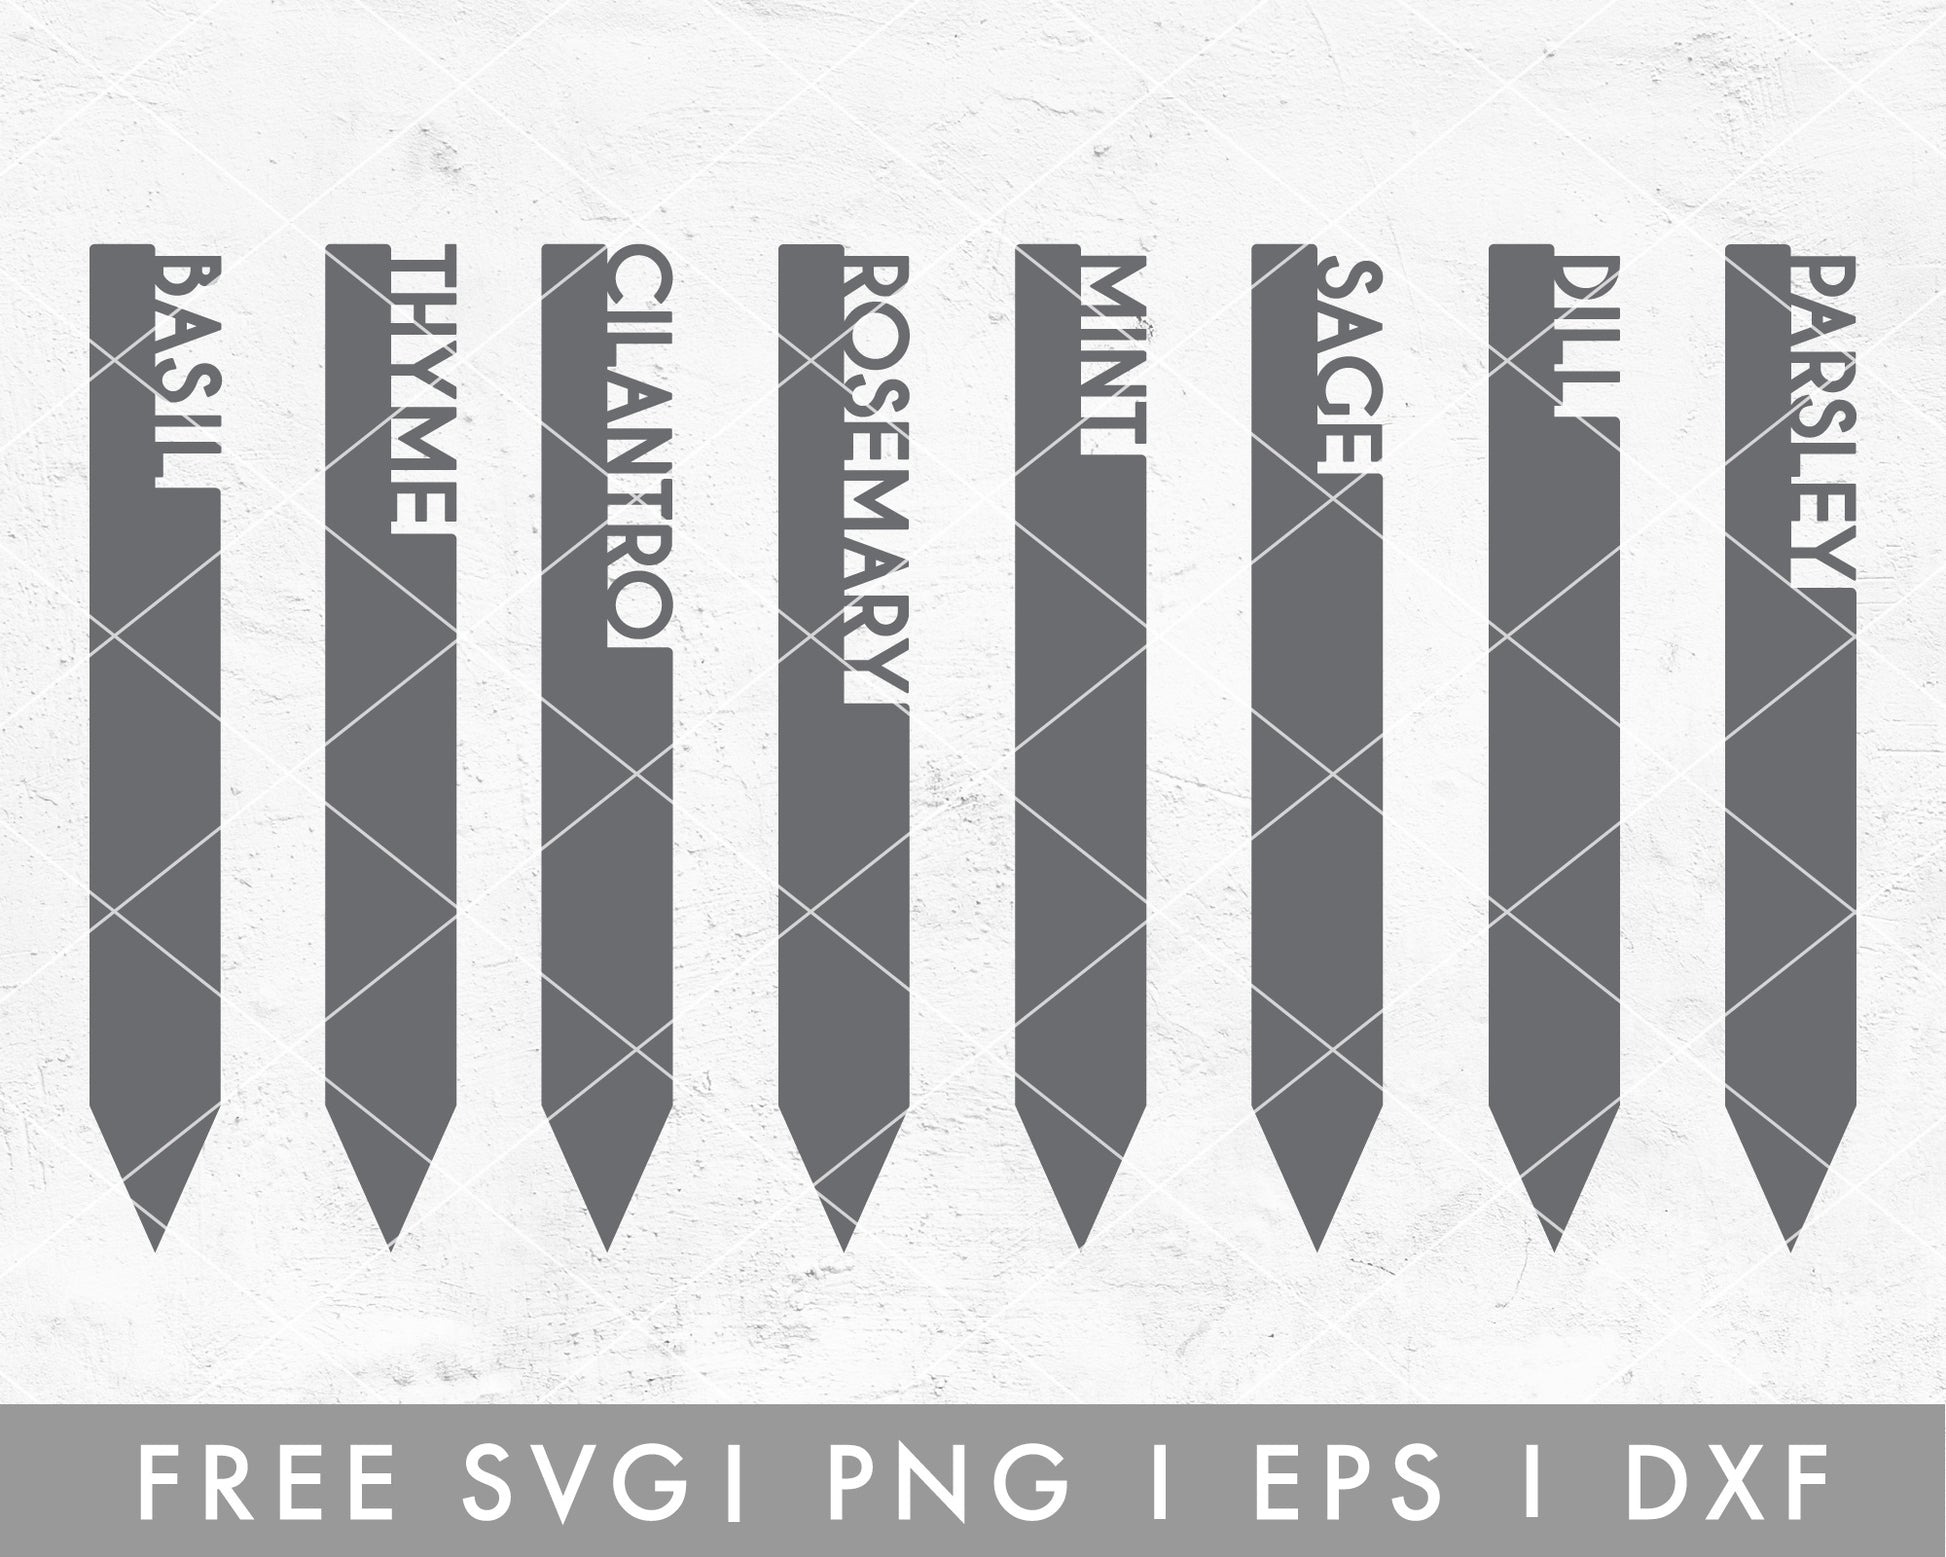 FREE Herb SVG | Gardening Cut File for Cricut, Cameo Silhouette | Free SVG Cut File